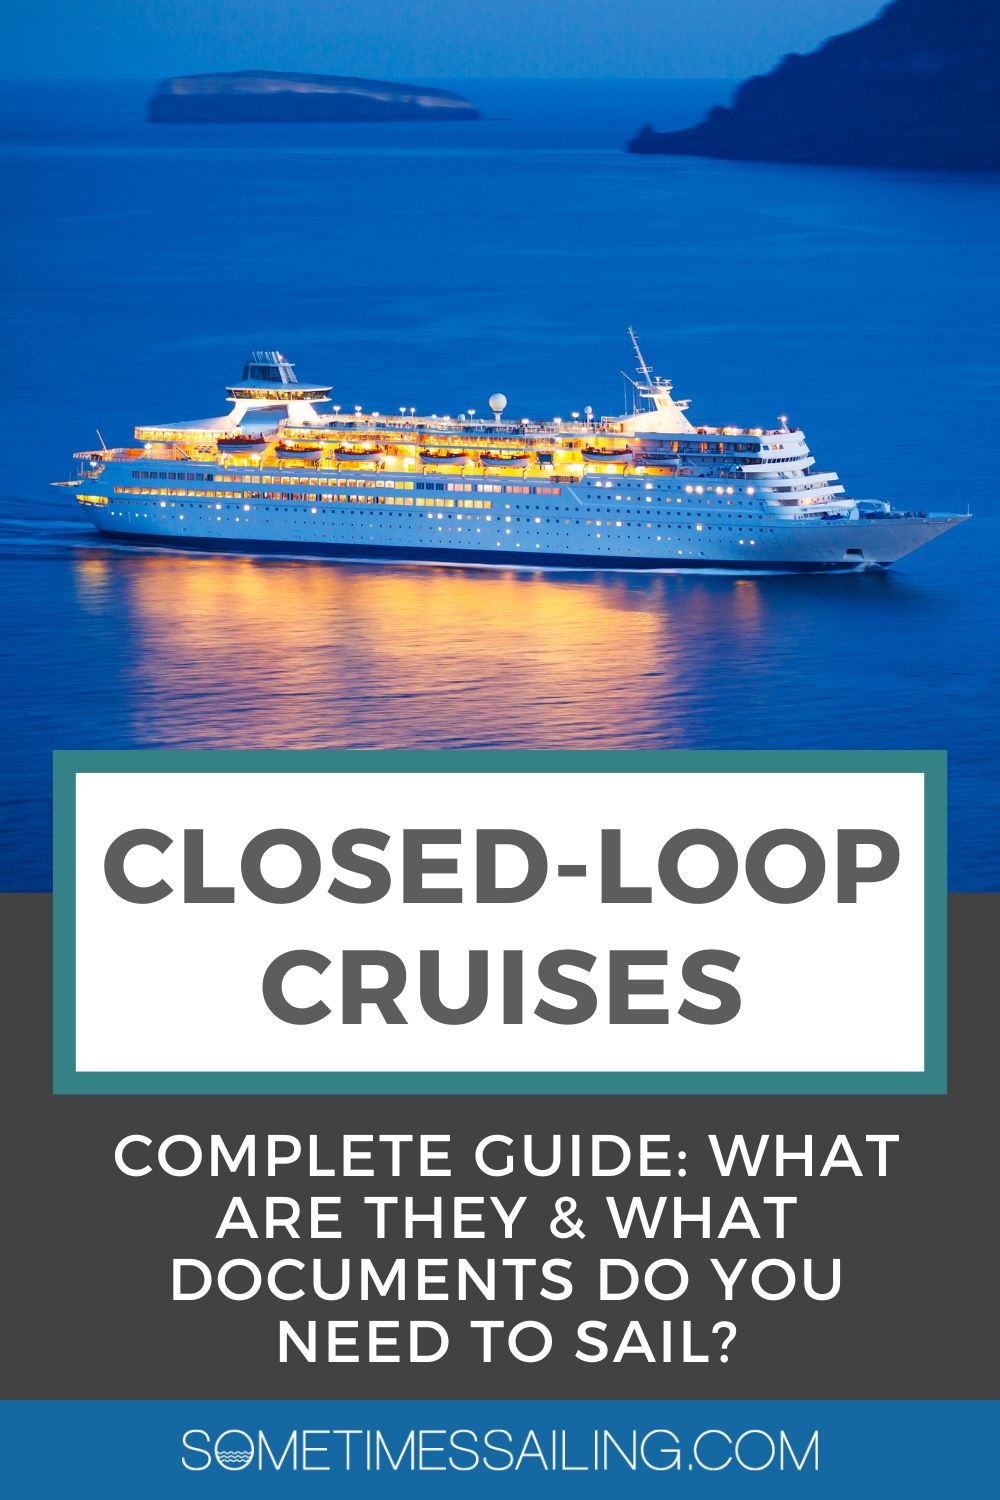 Closed-loop cruises: Complete Guide: What Are They and What Documents Do You Need to Sail? with a picture of a cruise ship in the ocean at nightfall. 